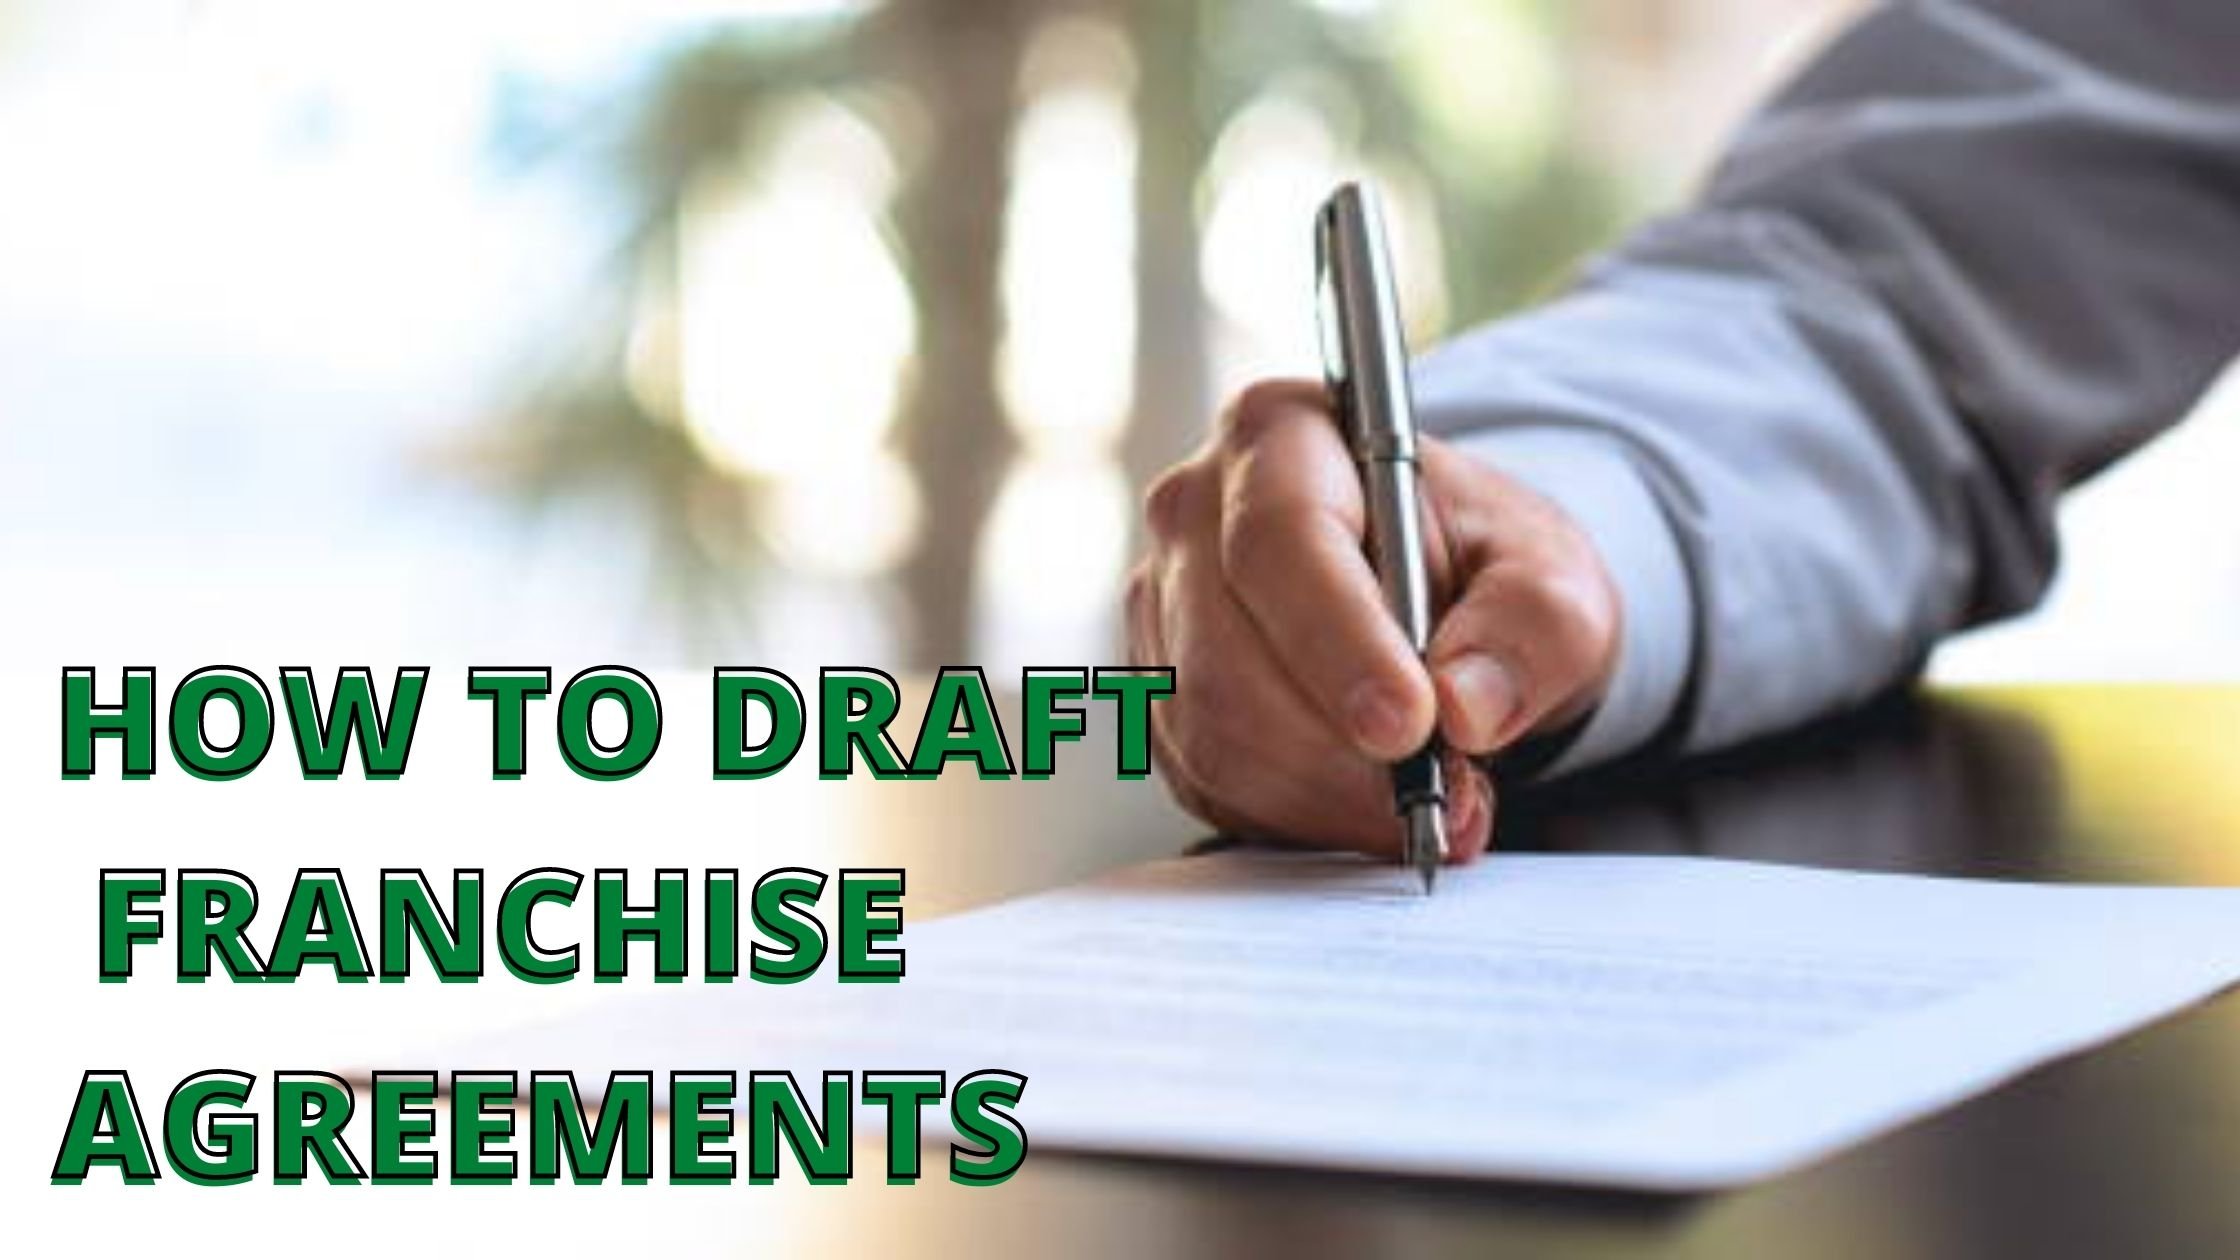 HOW TO DRAFT A FRANCHISE AGREEMENT?